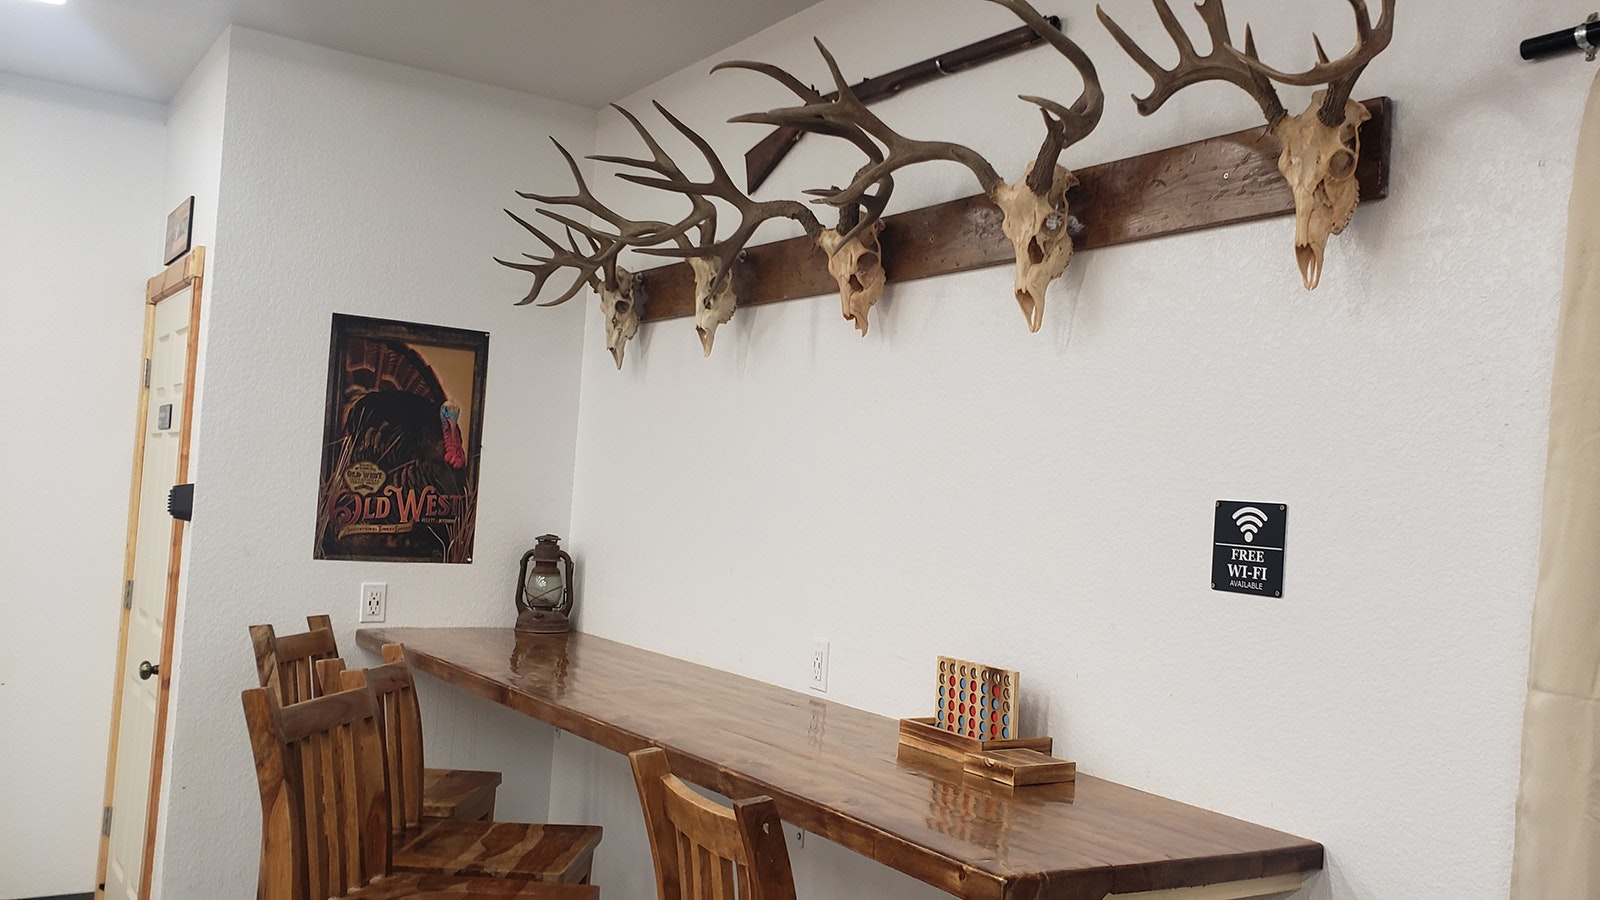 The table is made of wood Jake Barlow milled himself. He also made the rack with all the deer heads from animals he has hunted himself.